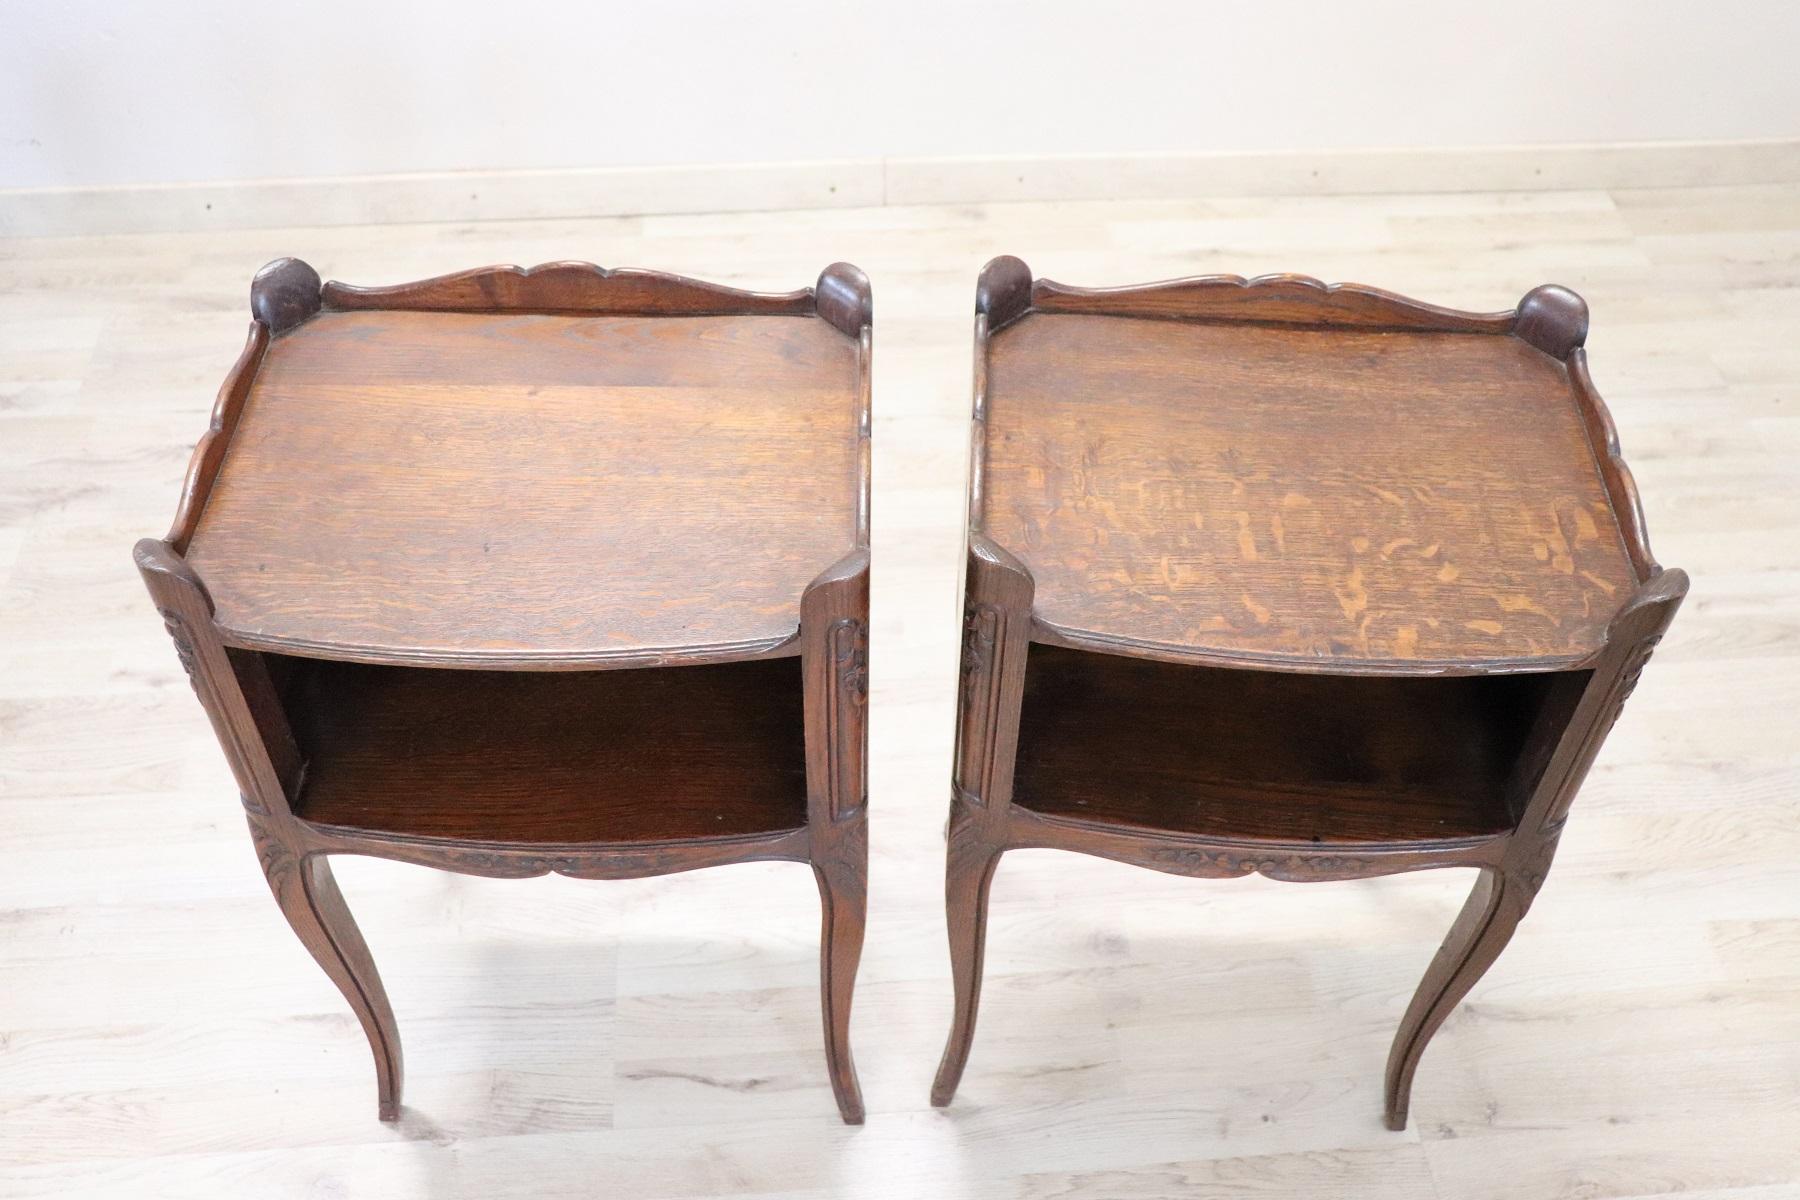 Beautiful pair of French Louis XV style bedside tables with slender legs and moves. Solid carved oak wood with floral decorations. A pair of really elegant bedside tables, ideal in the bedroom but also used in other rooms of the house. Used